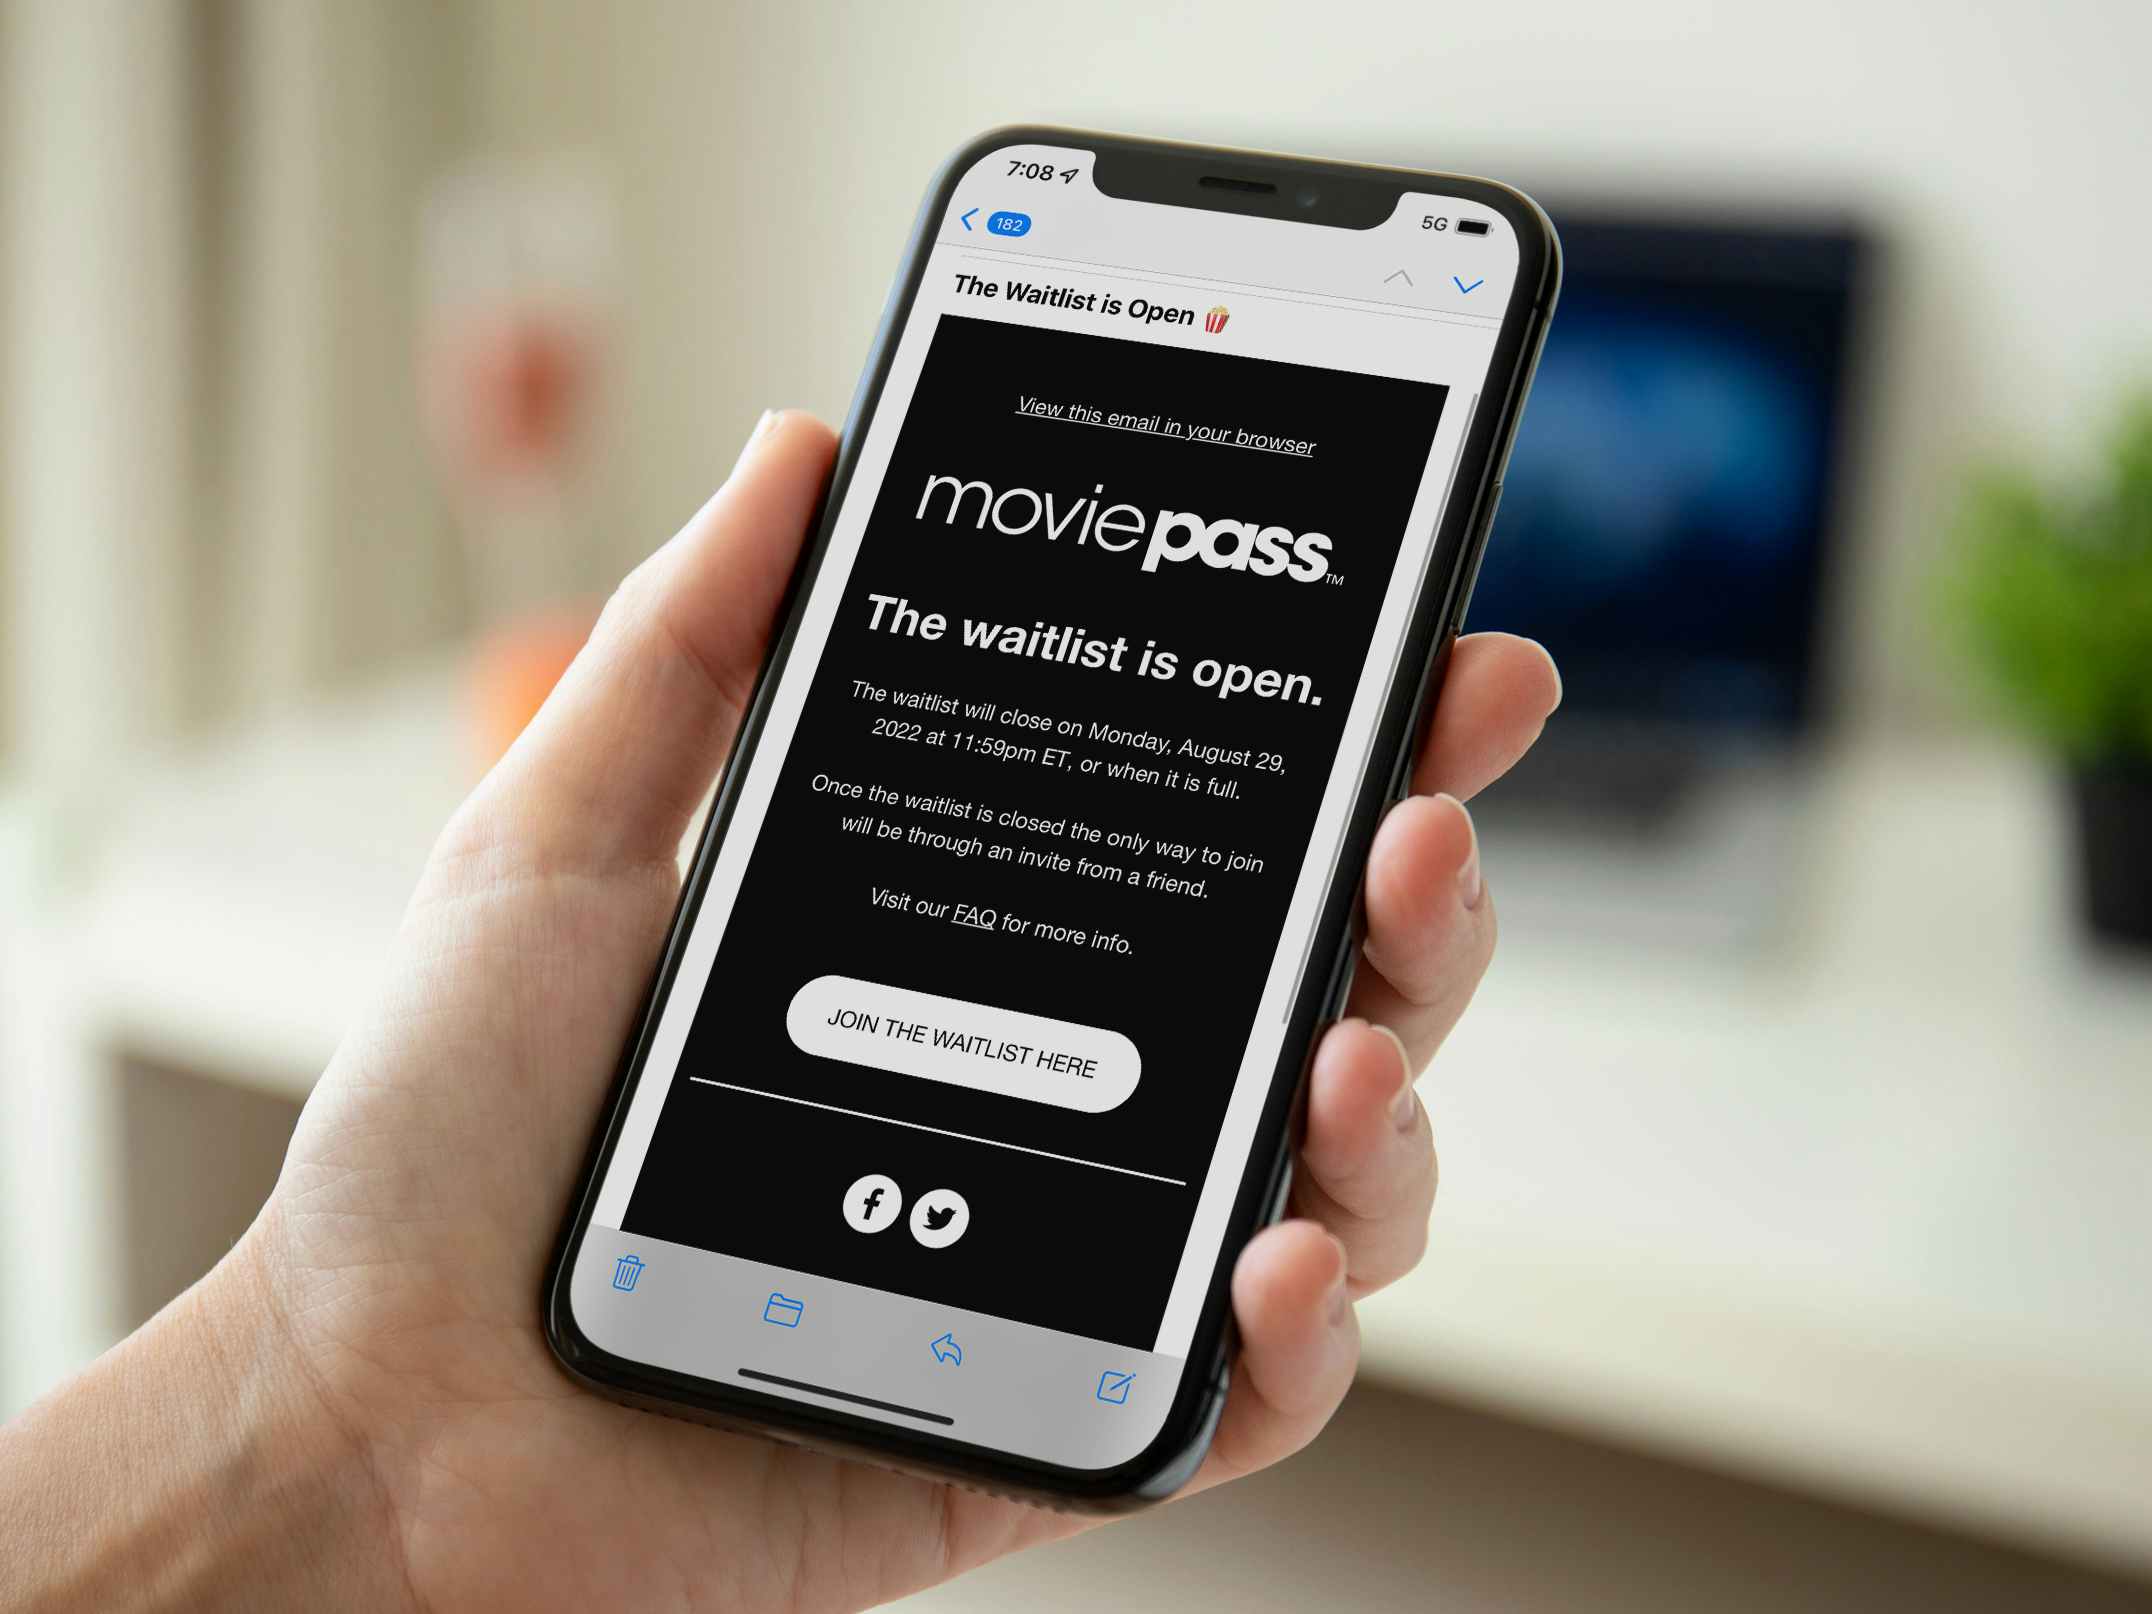 A person's hand holding an iPhone displaying an email from MoviePass stating that the waitlist is open.